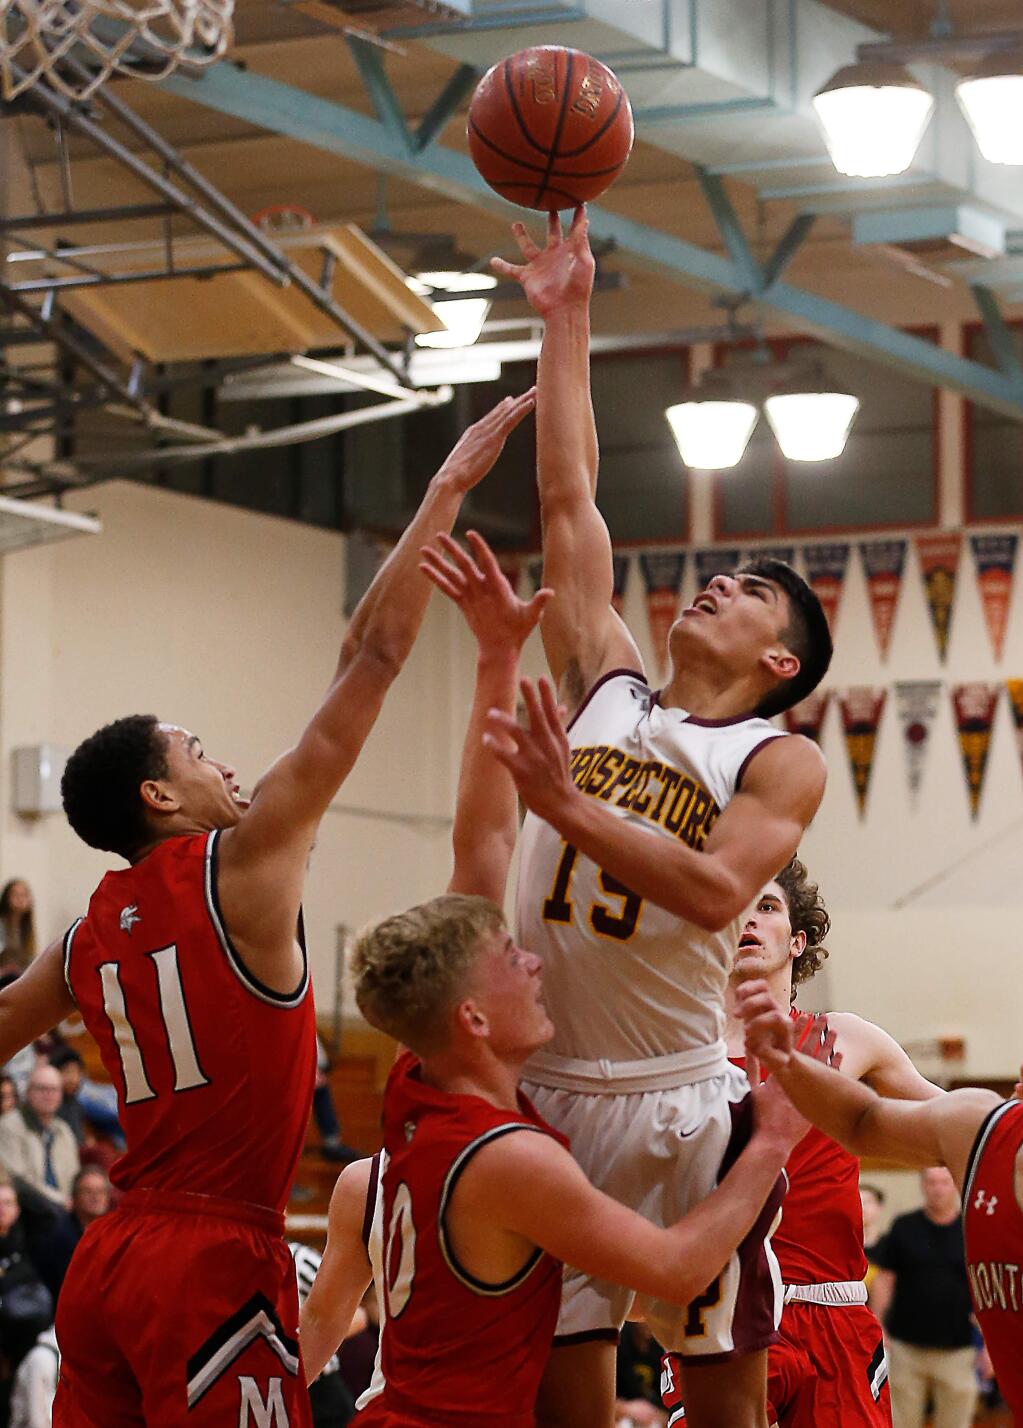 Piner's Adonis Gutierrez, right, shoots and scores over Montgomery's Cole Hallin and Devin Ramirez, far left, during the first half on Tuesday, Jan. 7, 2020. (Alvin Jornada / The Press Democrat)